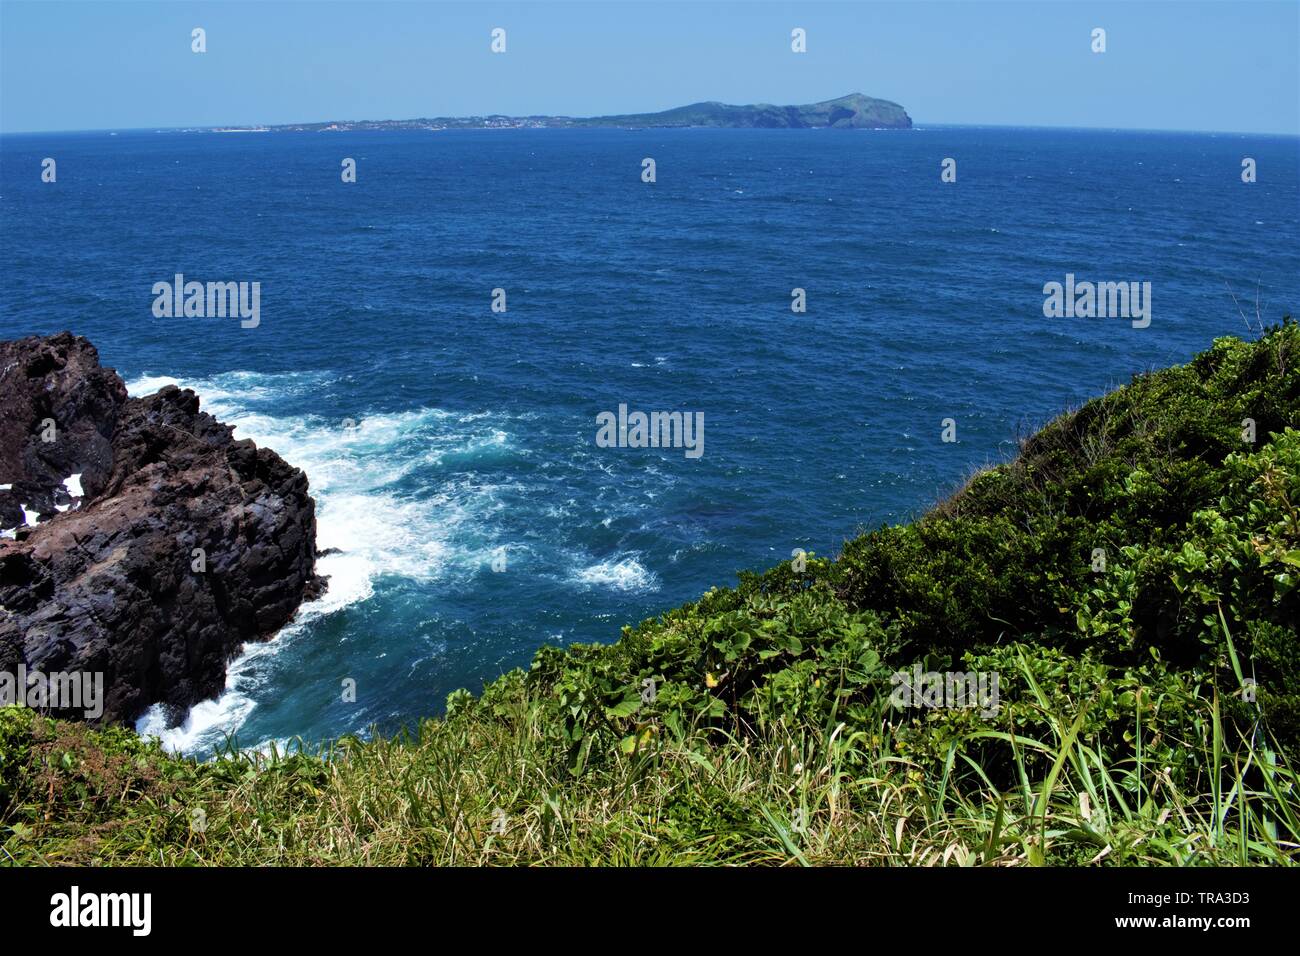 View at the island of Udo from Seongsan Ilchulbong tuff cone in Jeju, Korea Stock Photo